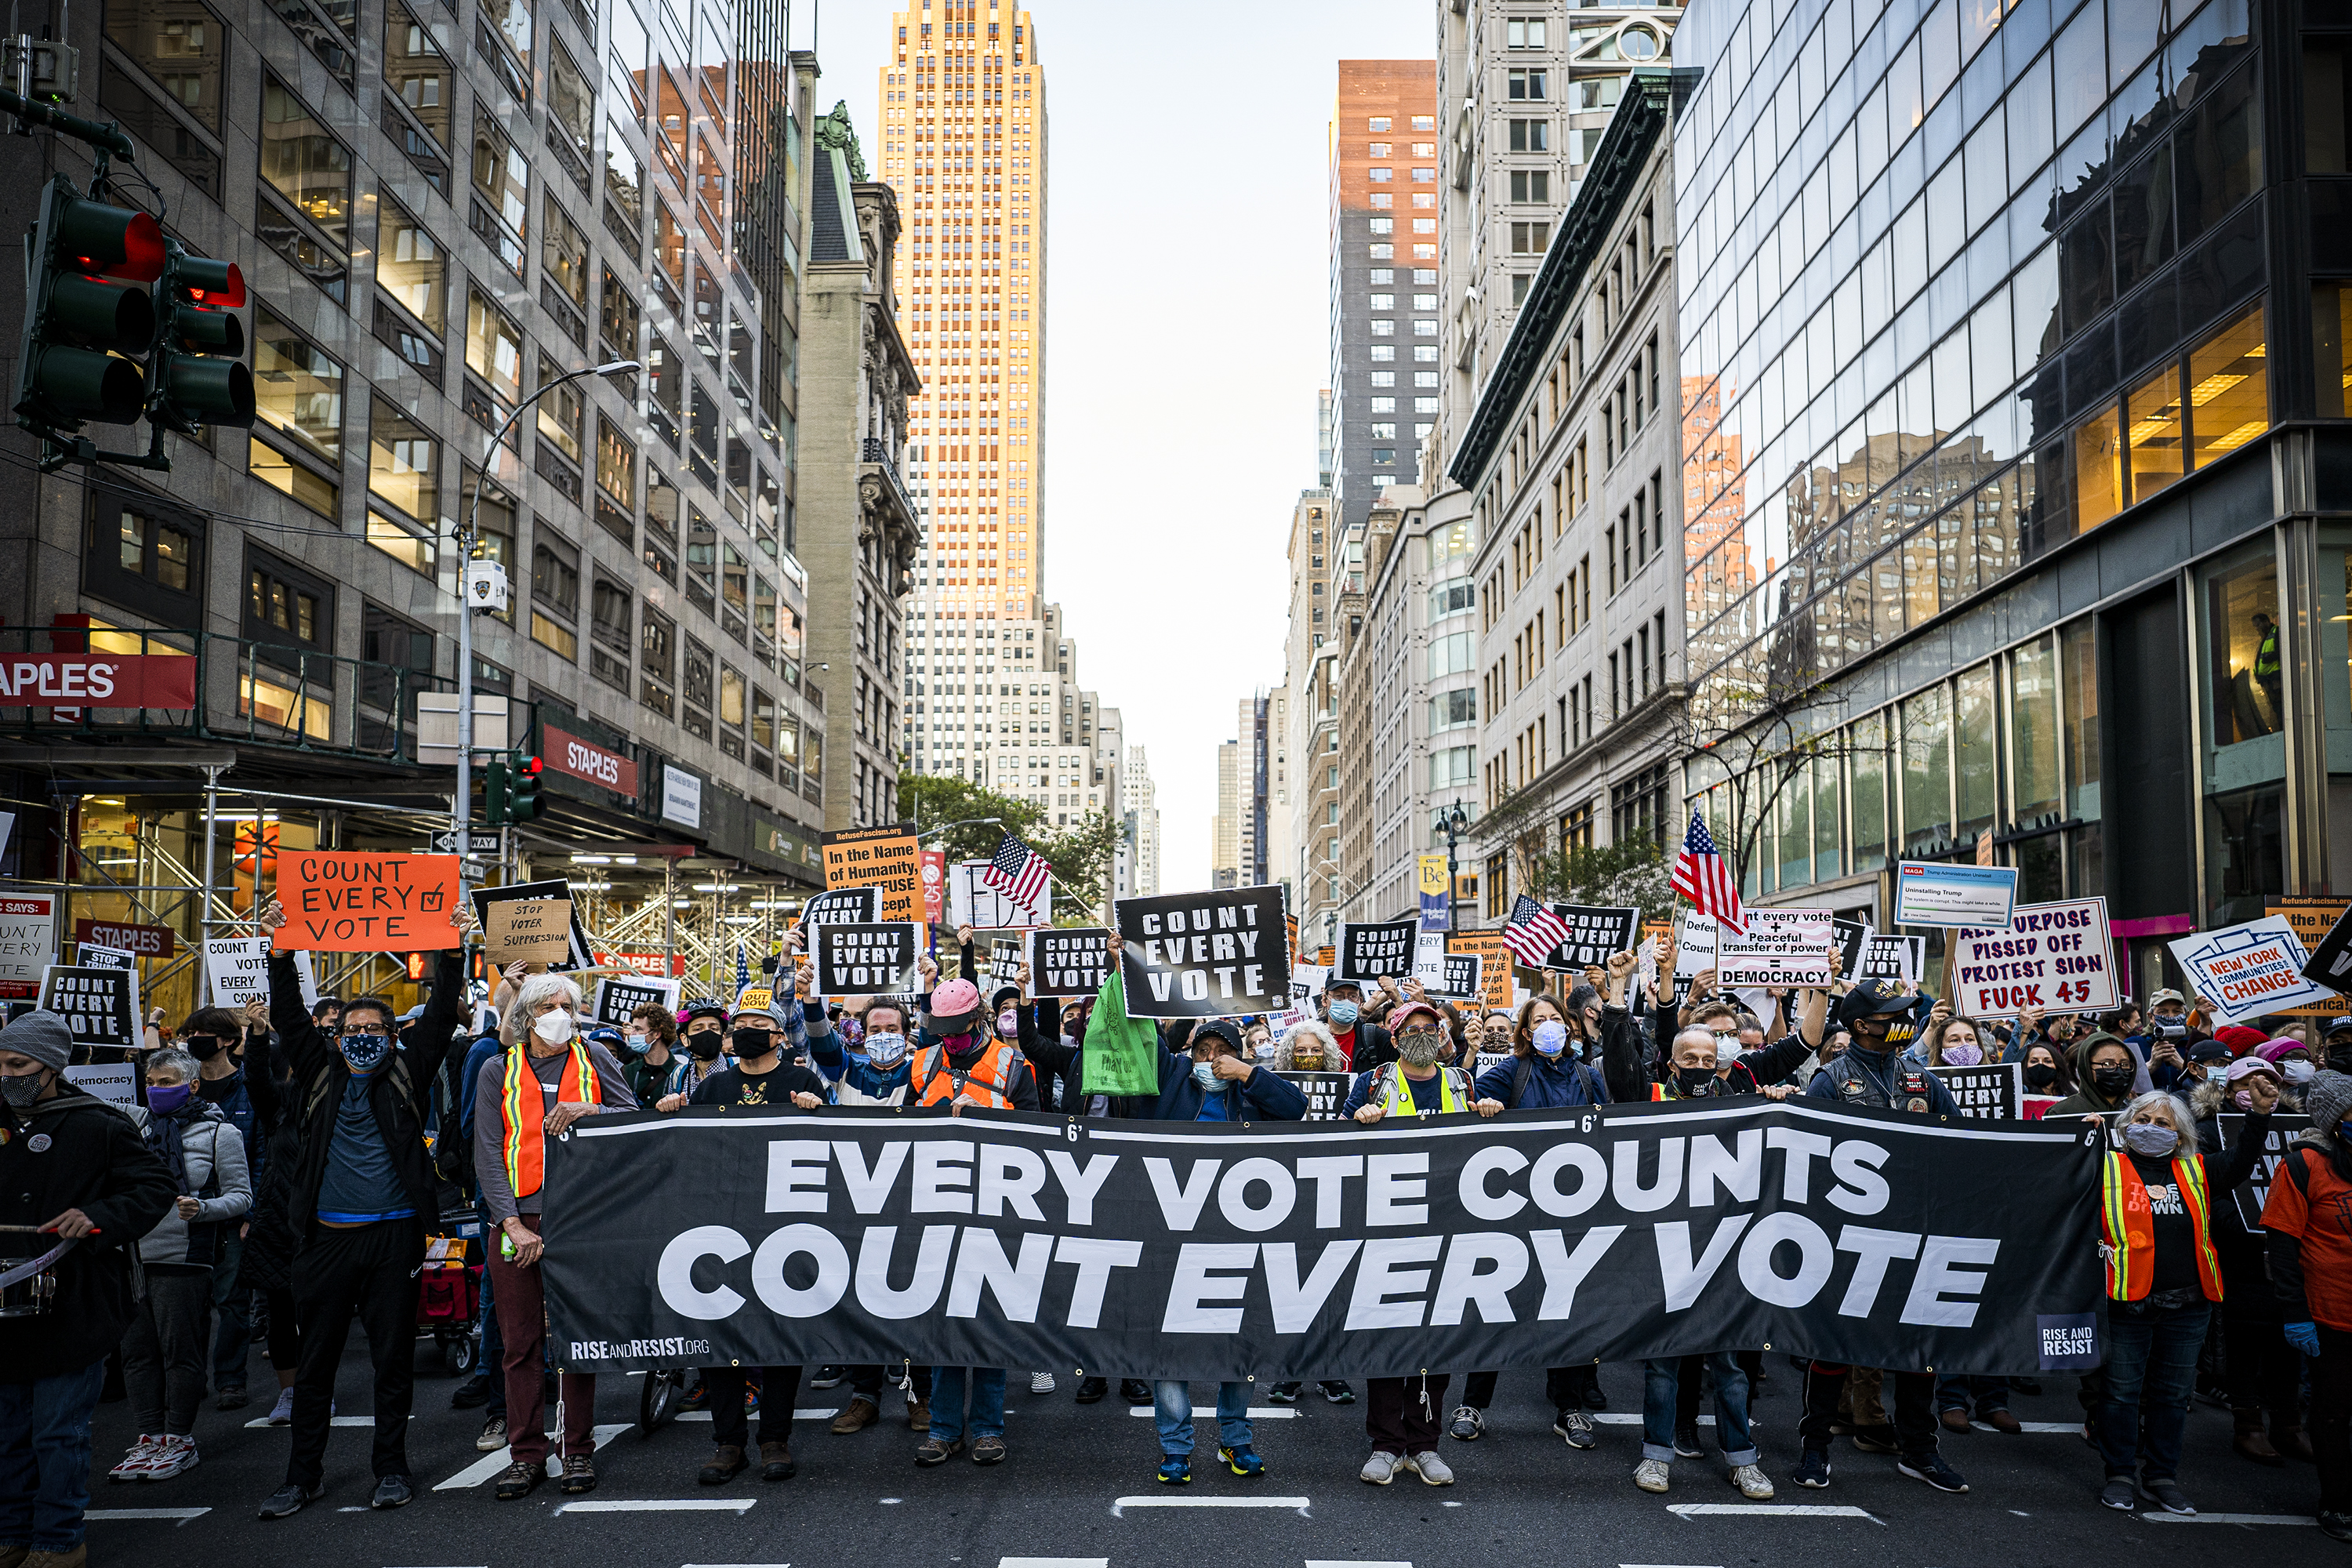 Protesters fill a city street carrying a sign reading, “Every vote counts. Count every vote.”